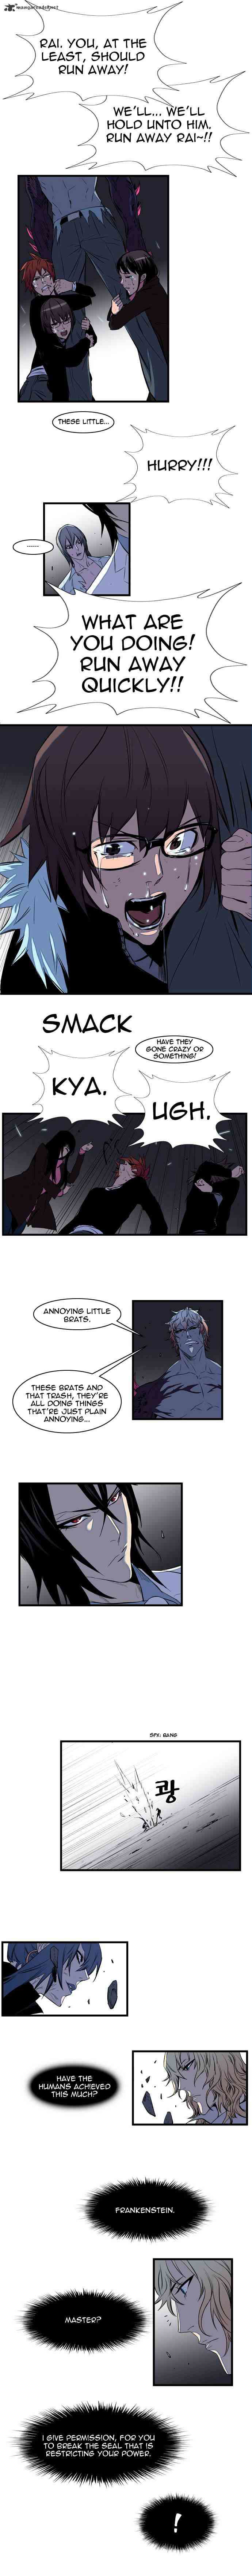 Noblesse Chapter 76 _ Chapters 76-90 page 5